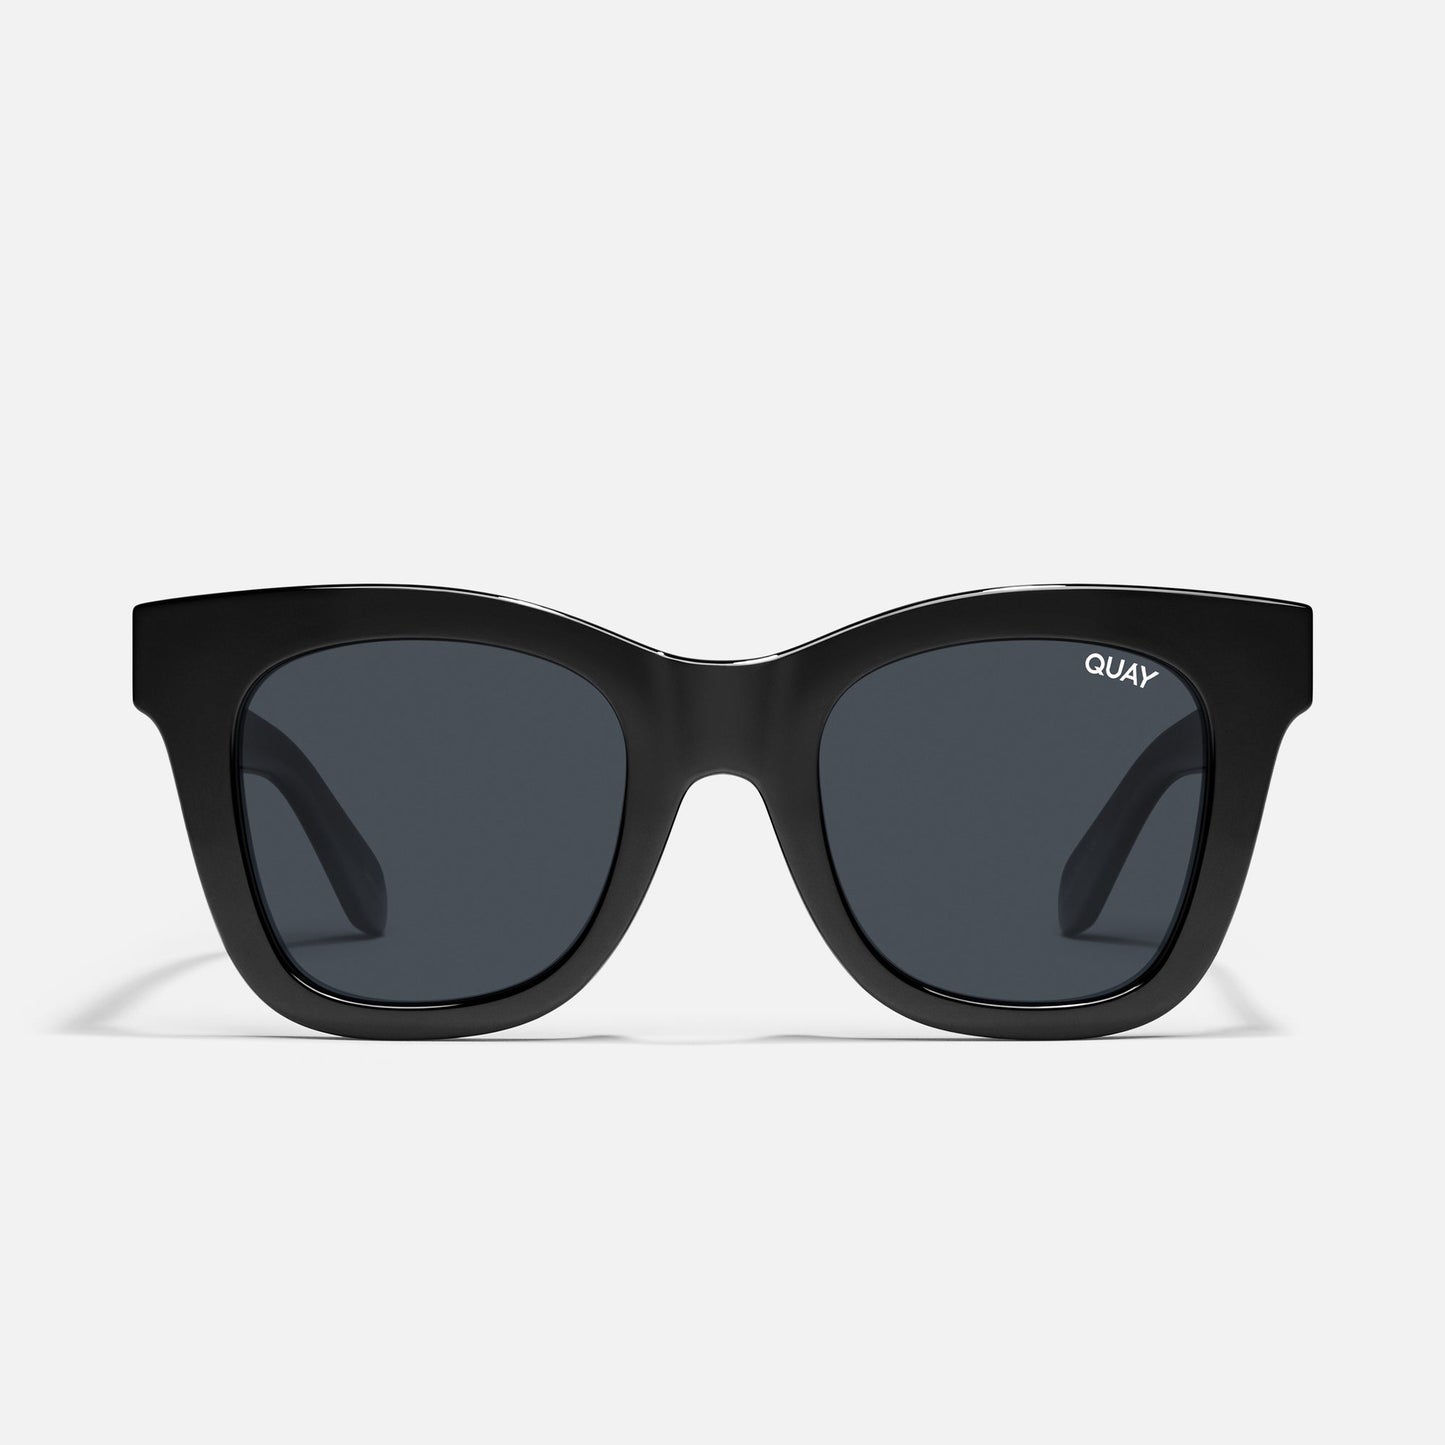 After Hours Sunglasses